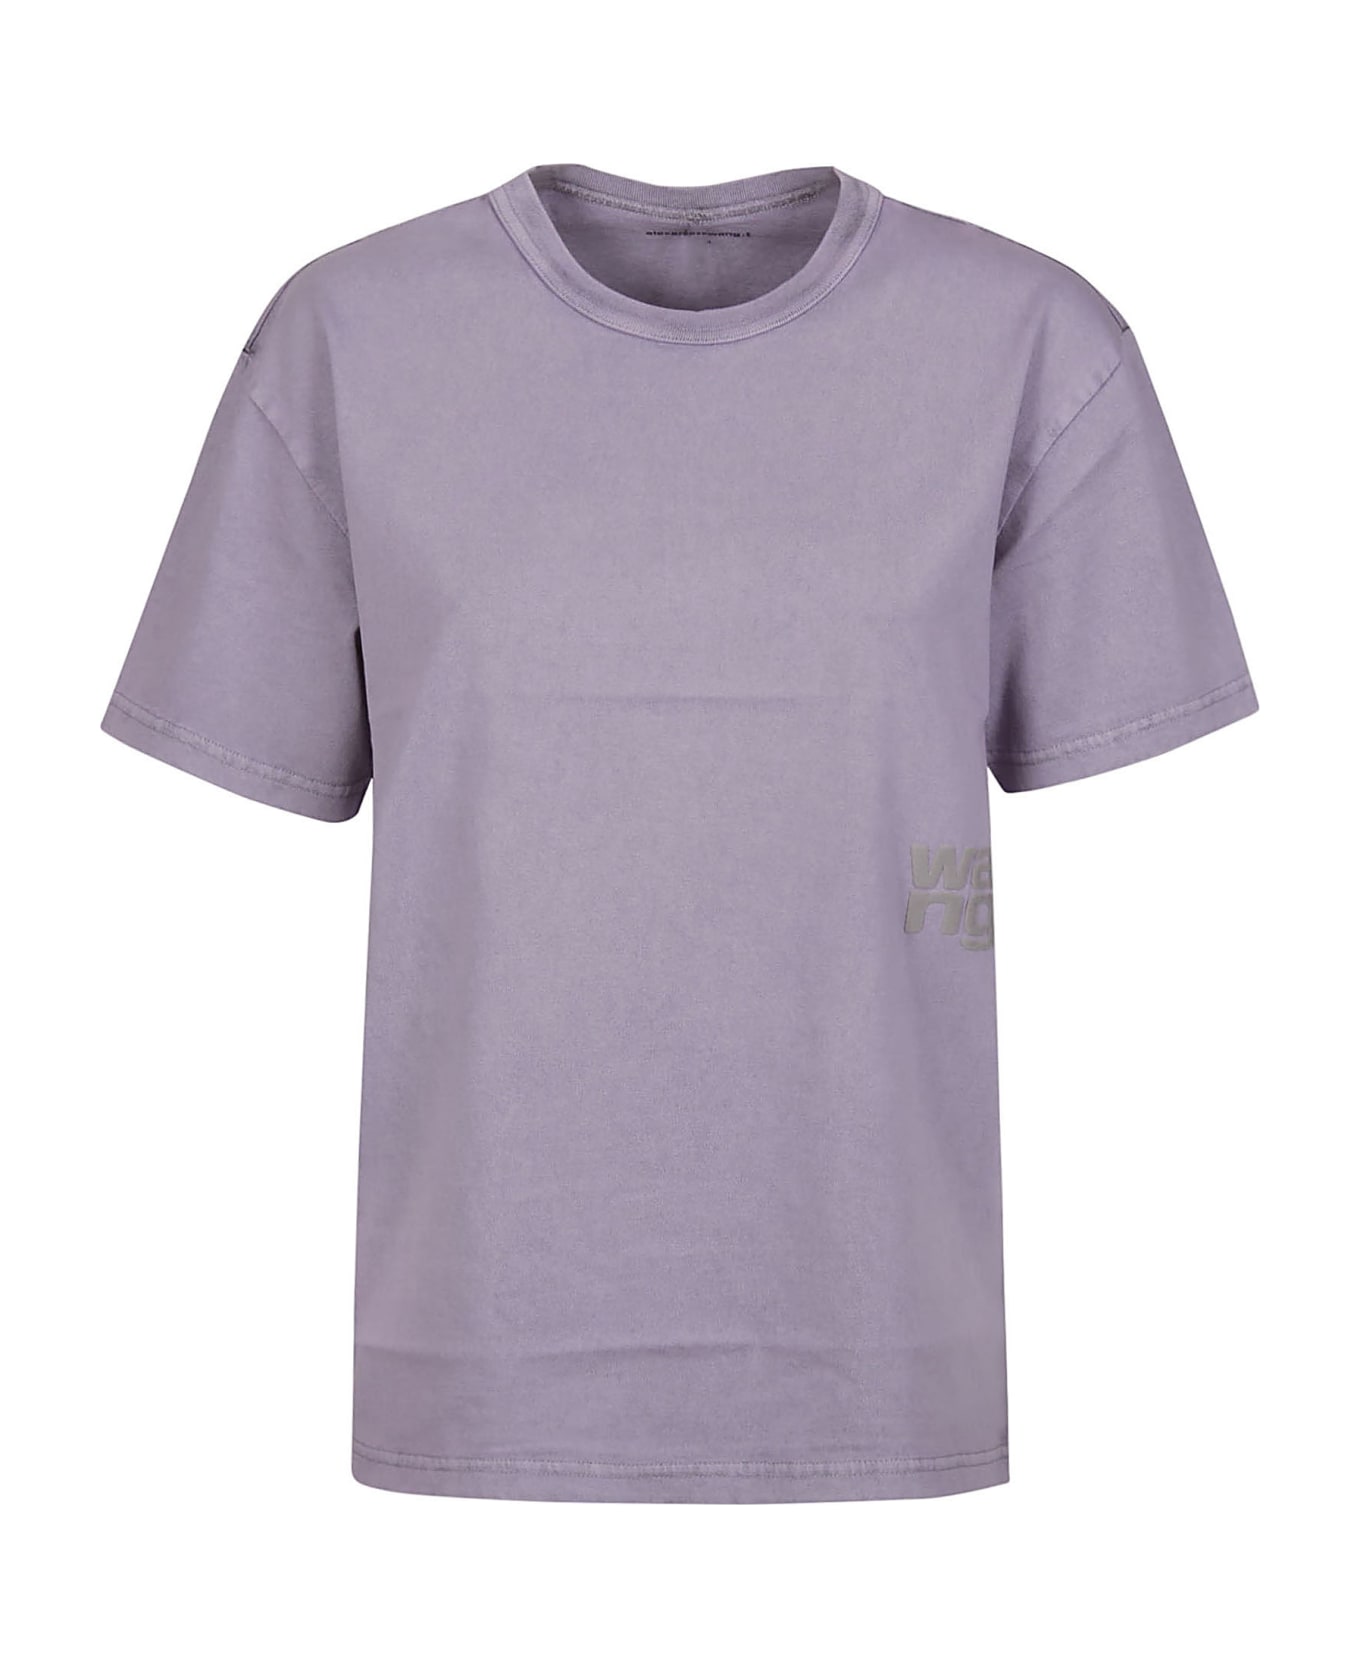 T by Alexander Wang Puff Logo Bound Neck Essential T-shirt - A Acid Pink Lavender